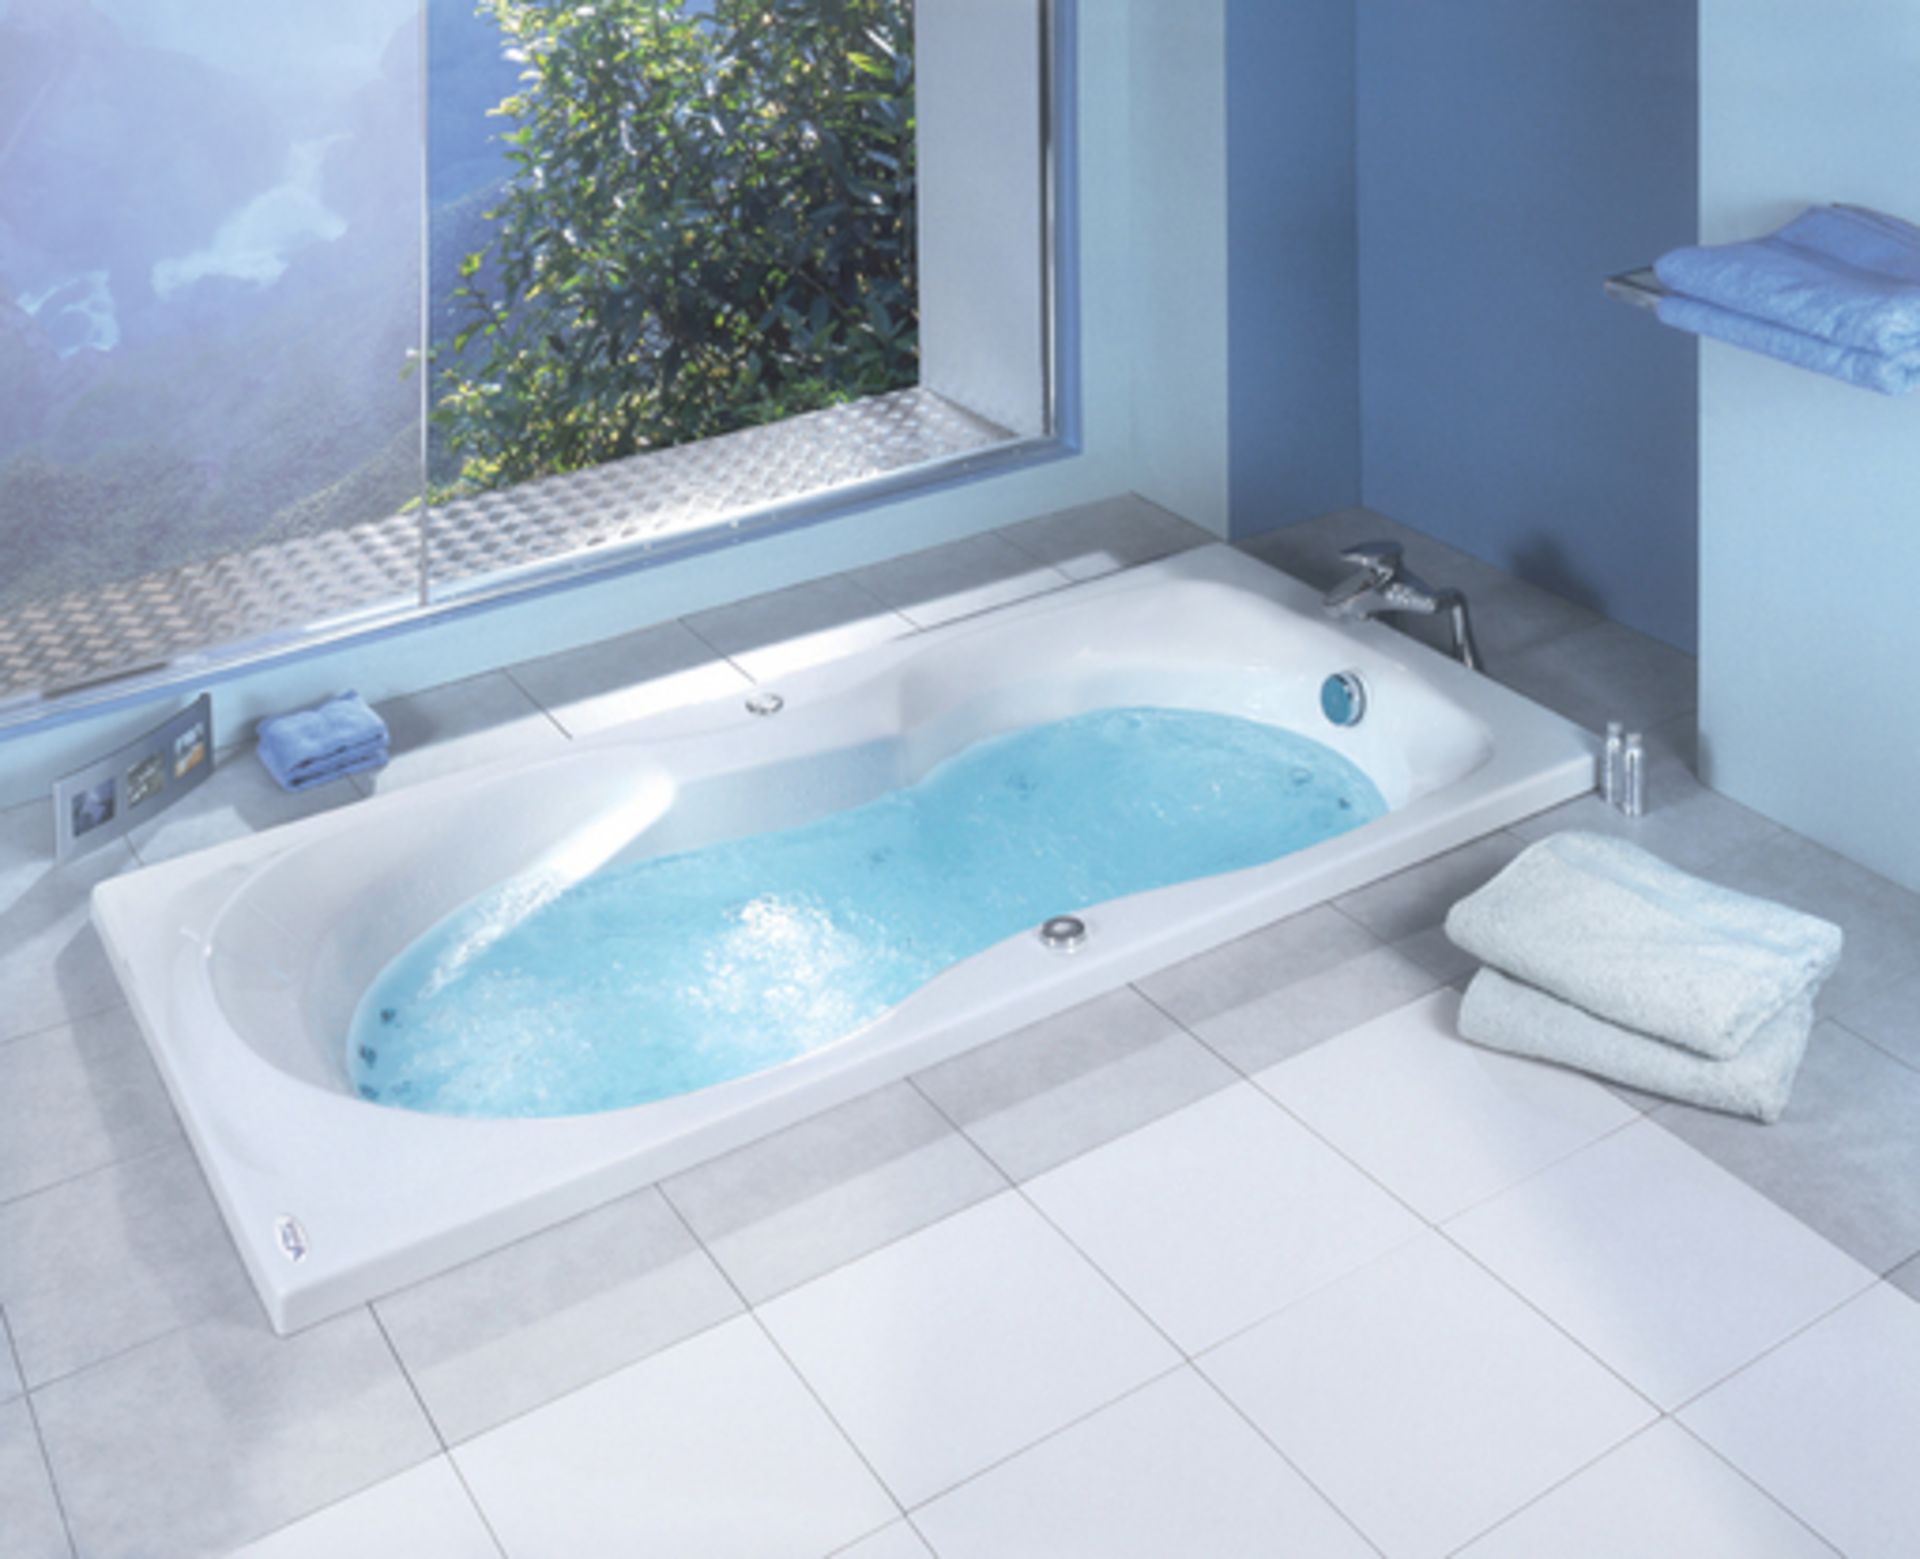 1 x Vogue Bathrooms Sapphire Double Ended Inset Bath Tub - Size: 1800 x 900mm - For The Ultimate - Image 2 of 3